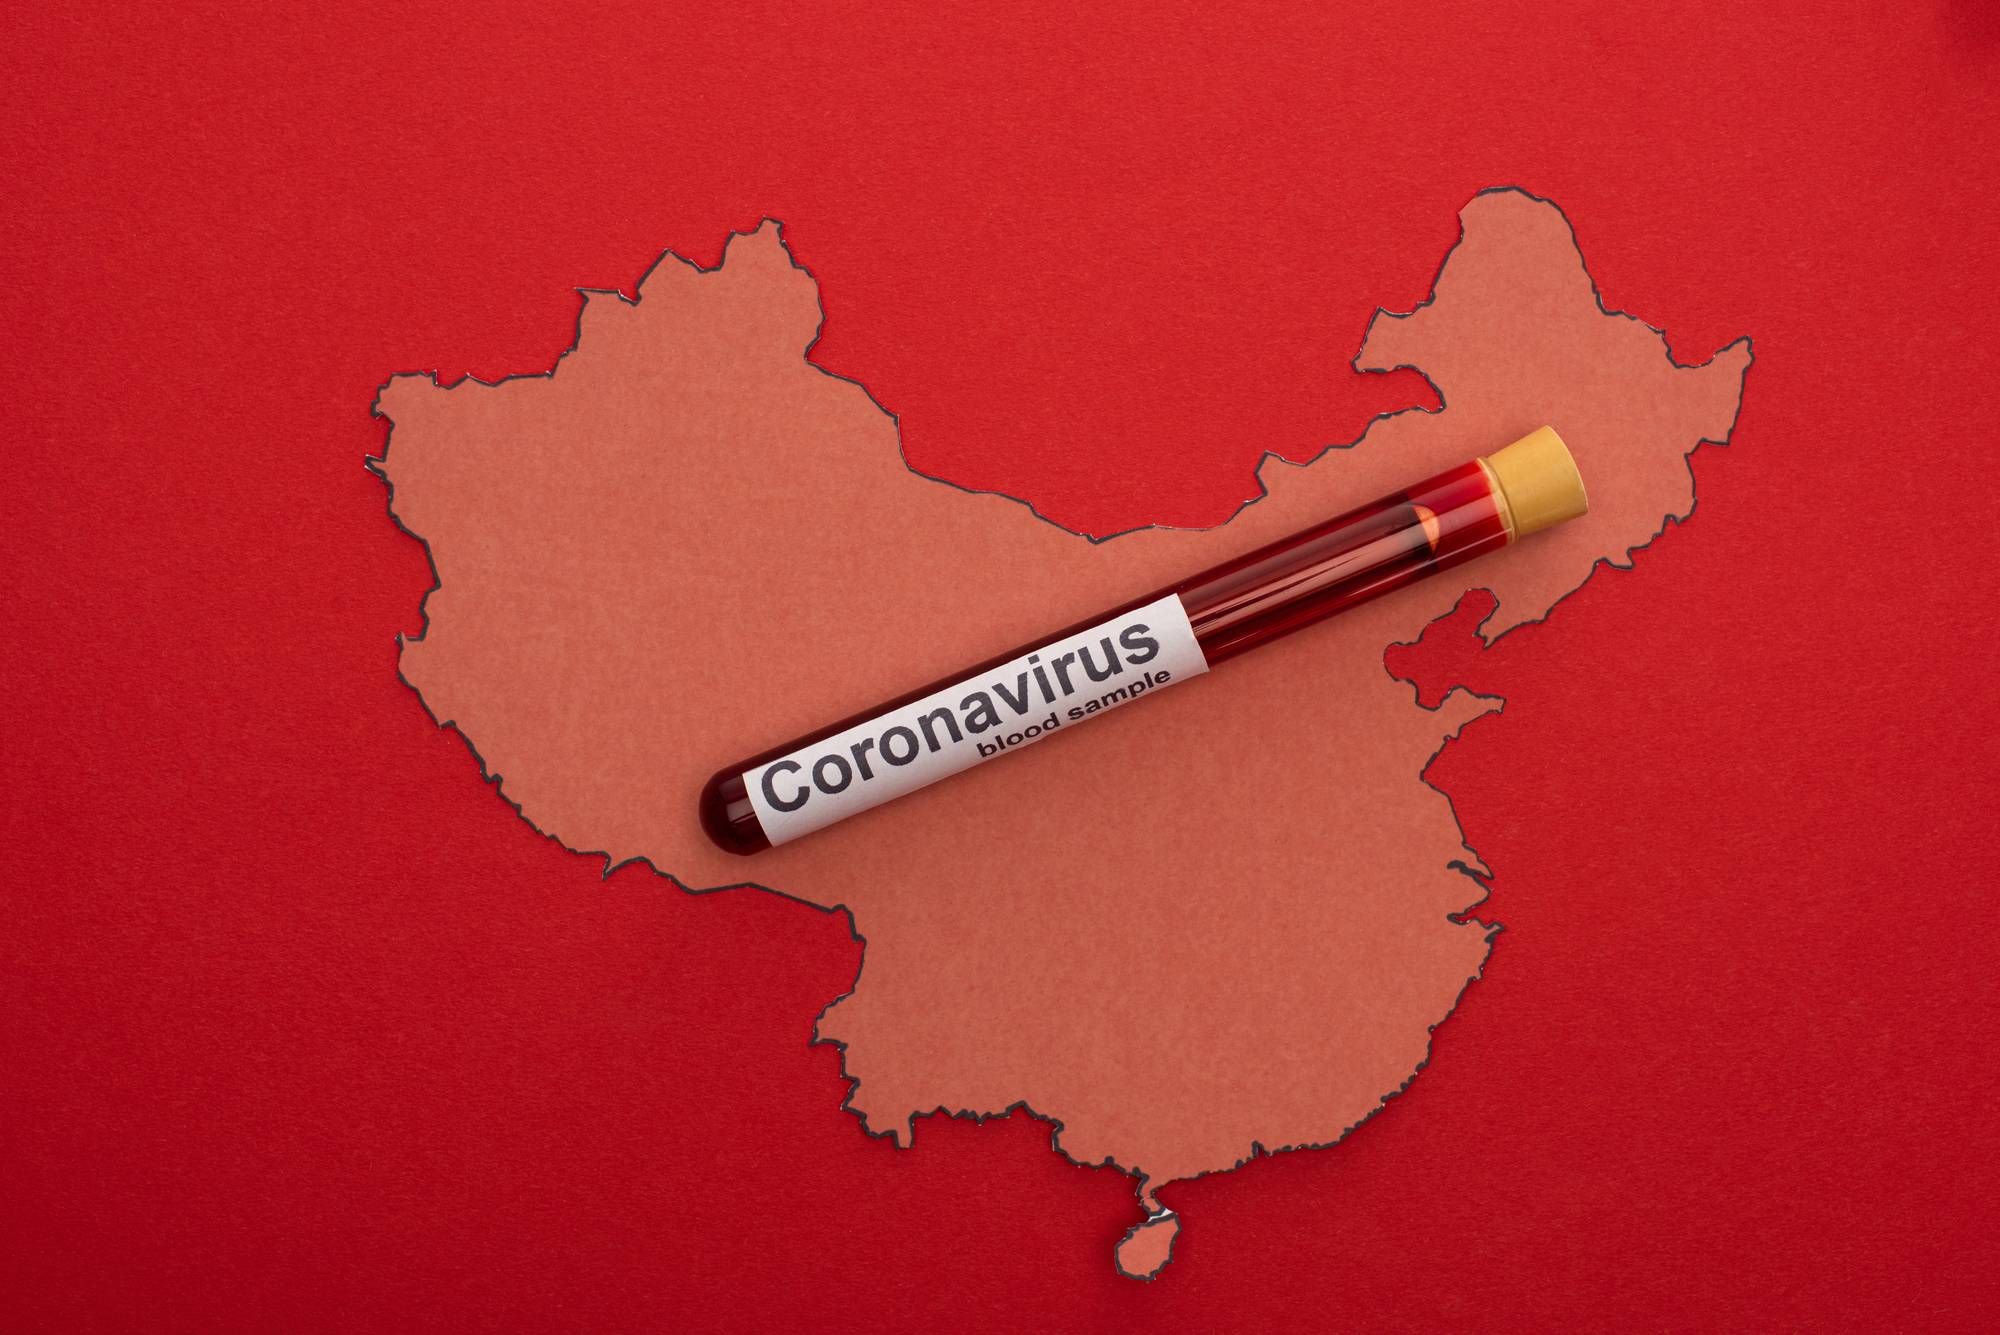 A new China policy bill would allow the country to be held liable in coronavirus outbreak lawsuits.